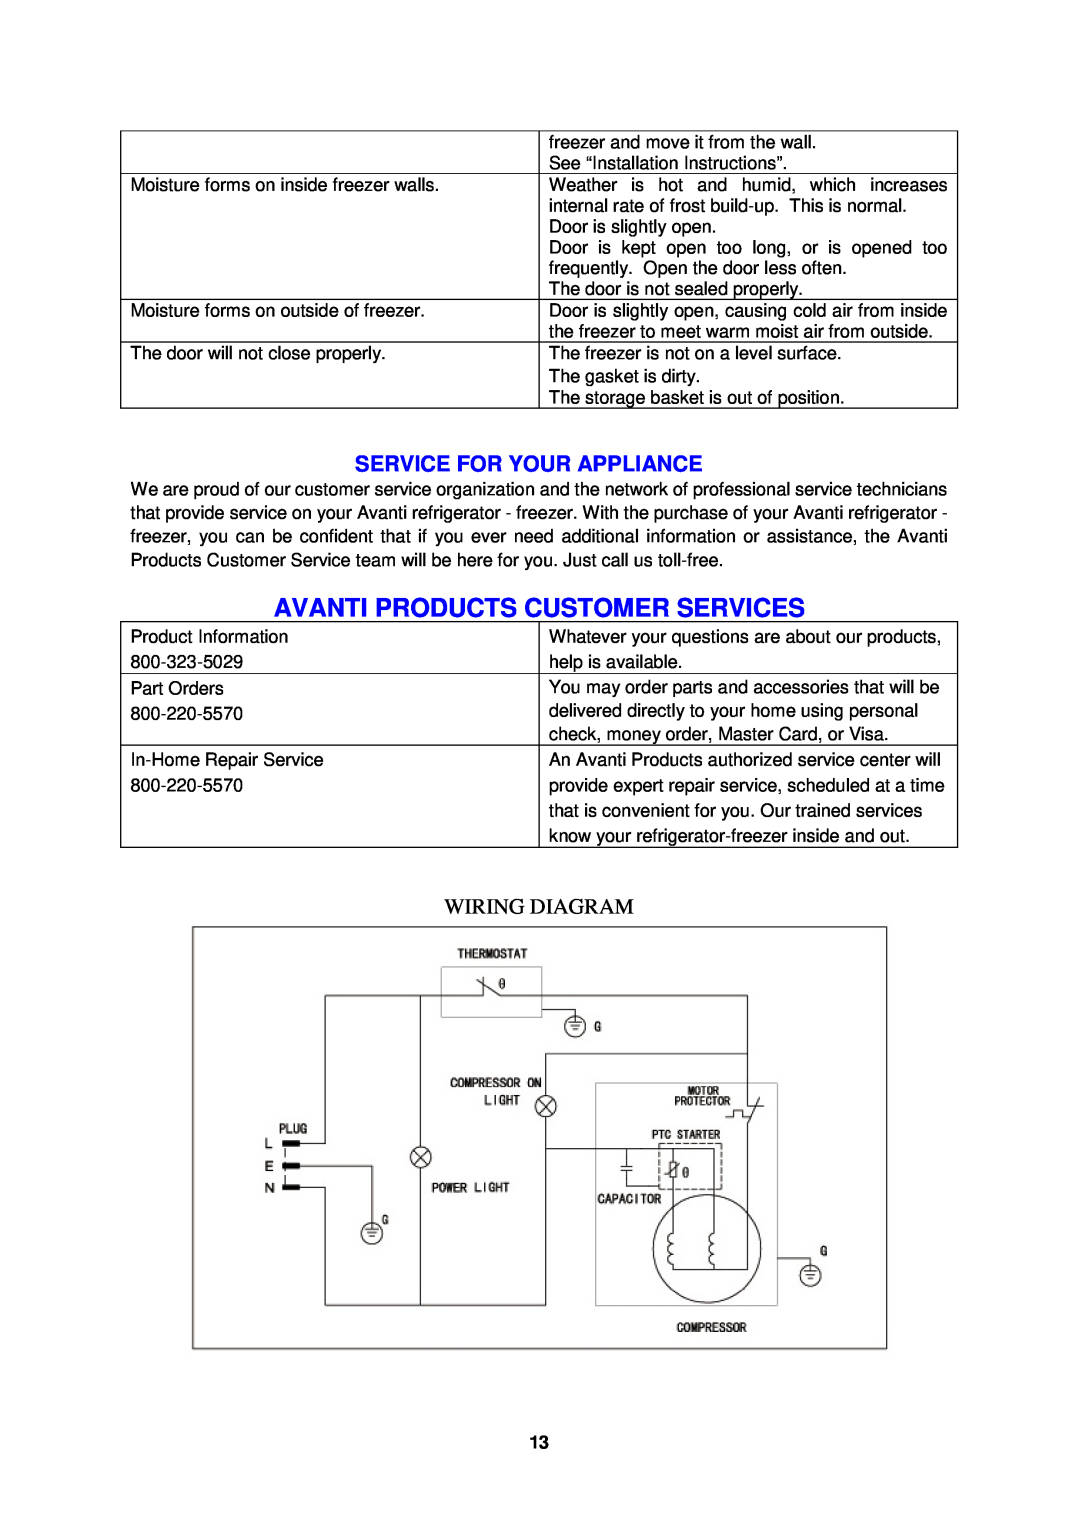 Avanti cf524cg, CF1526E instruction manual Service For Your Appliance, Avanti Products Customer Services, Wiring Diagram 